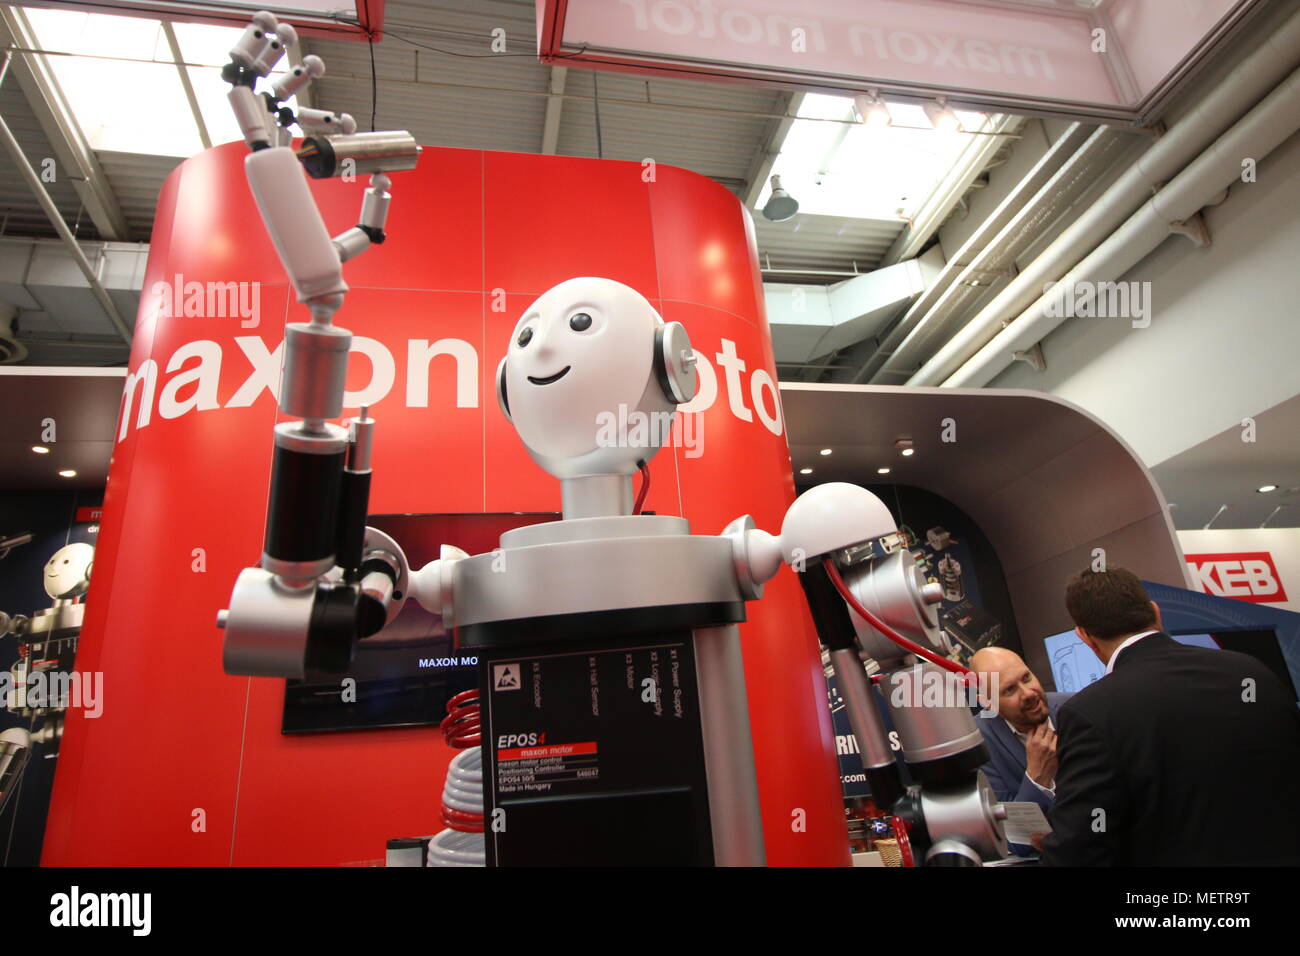 Hannover, Germany - April 23, 2018: A robot entertains visitors in Hannover. At this year's Hannover Fair, the world's largest industrial trade fair, everything revolves around digitisation 4.0, robots and self-learning systems. Stock Photo